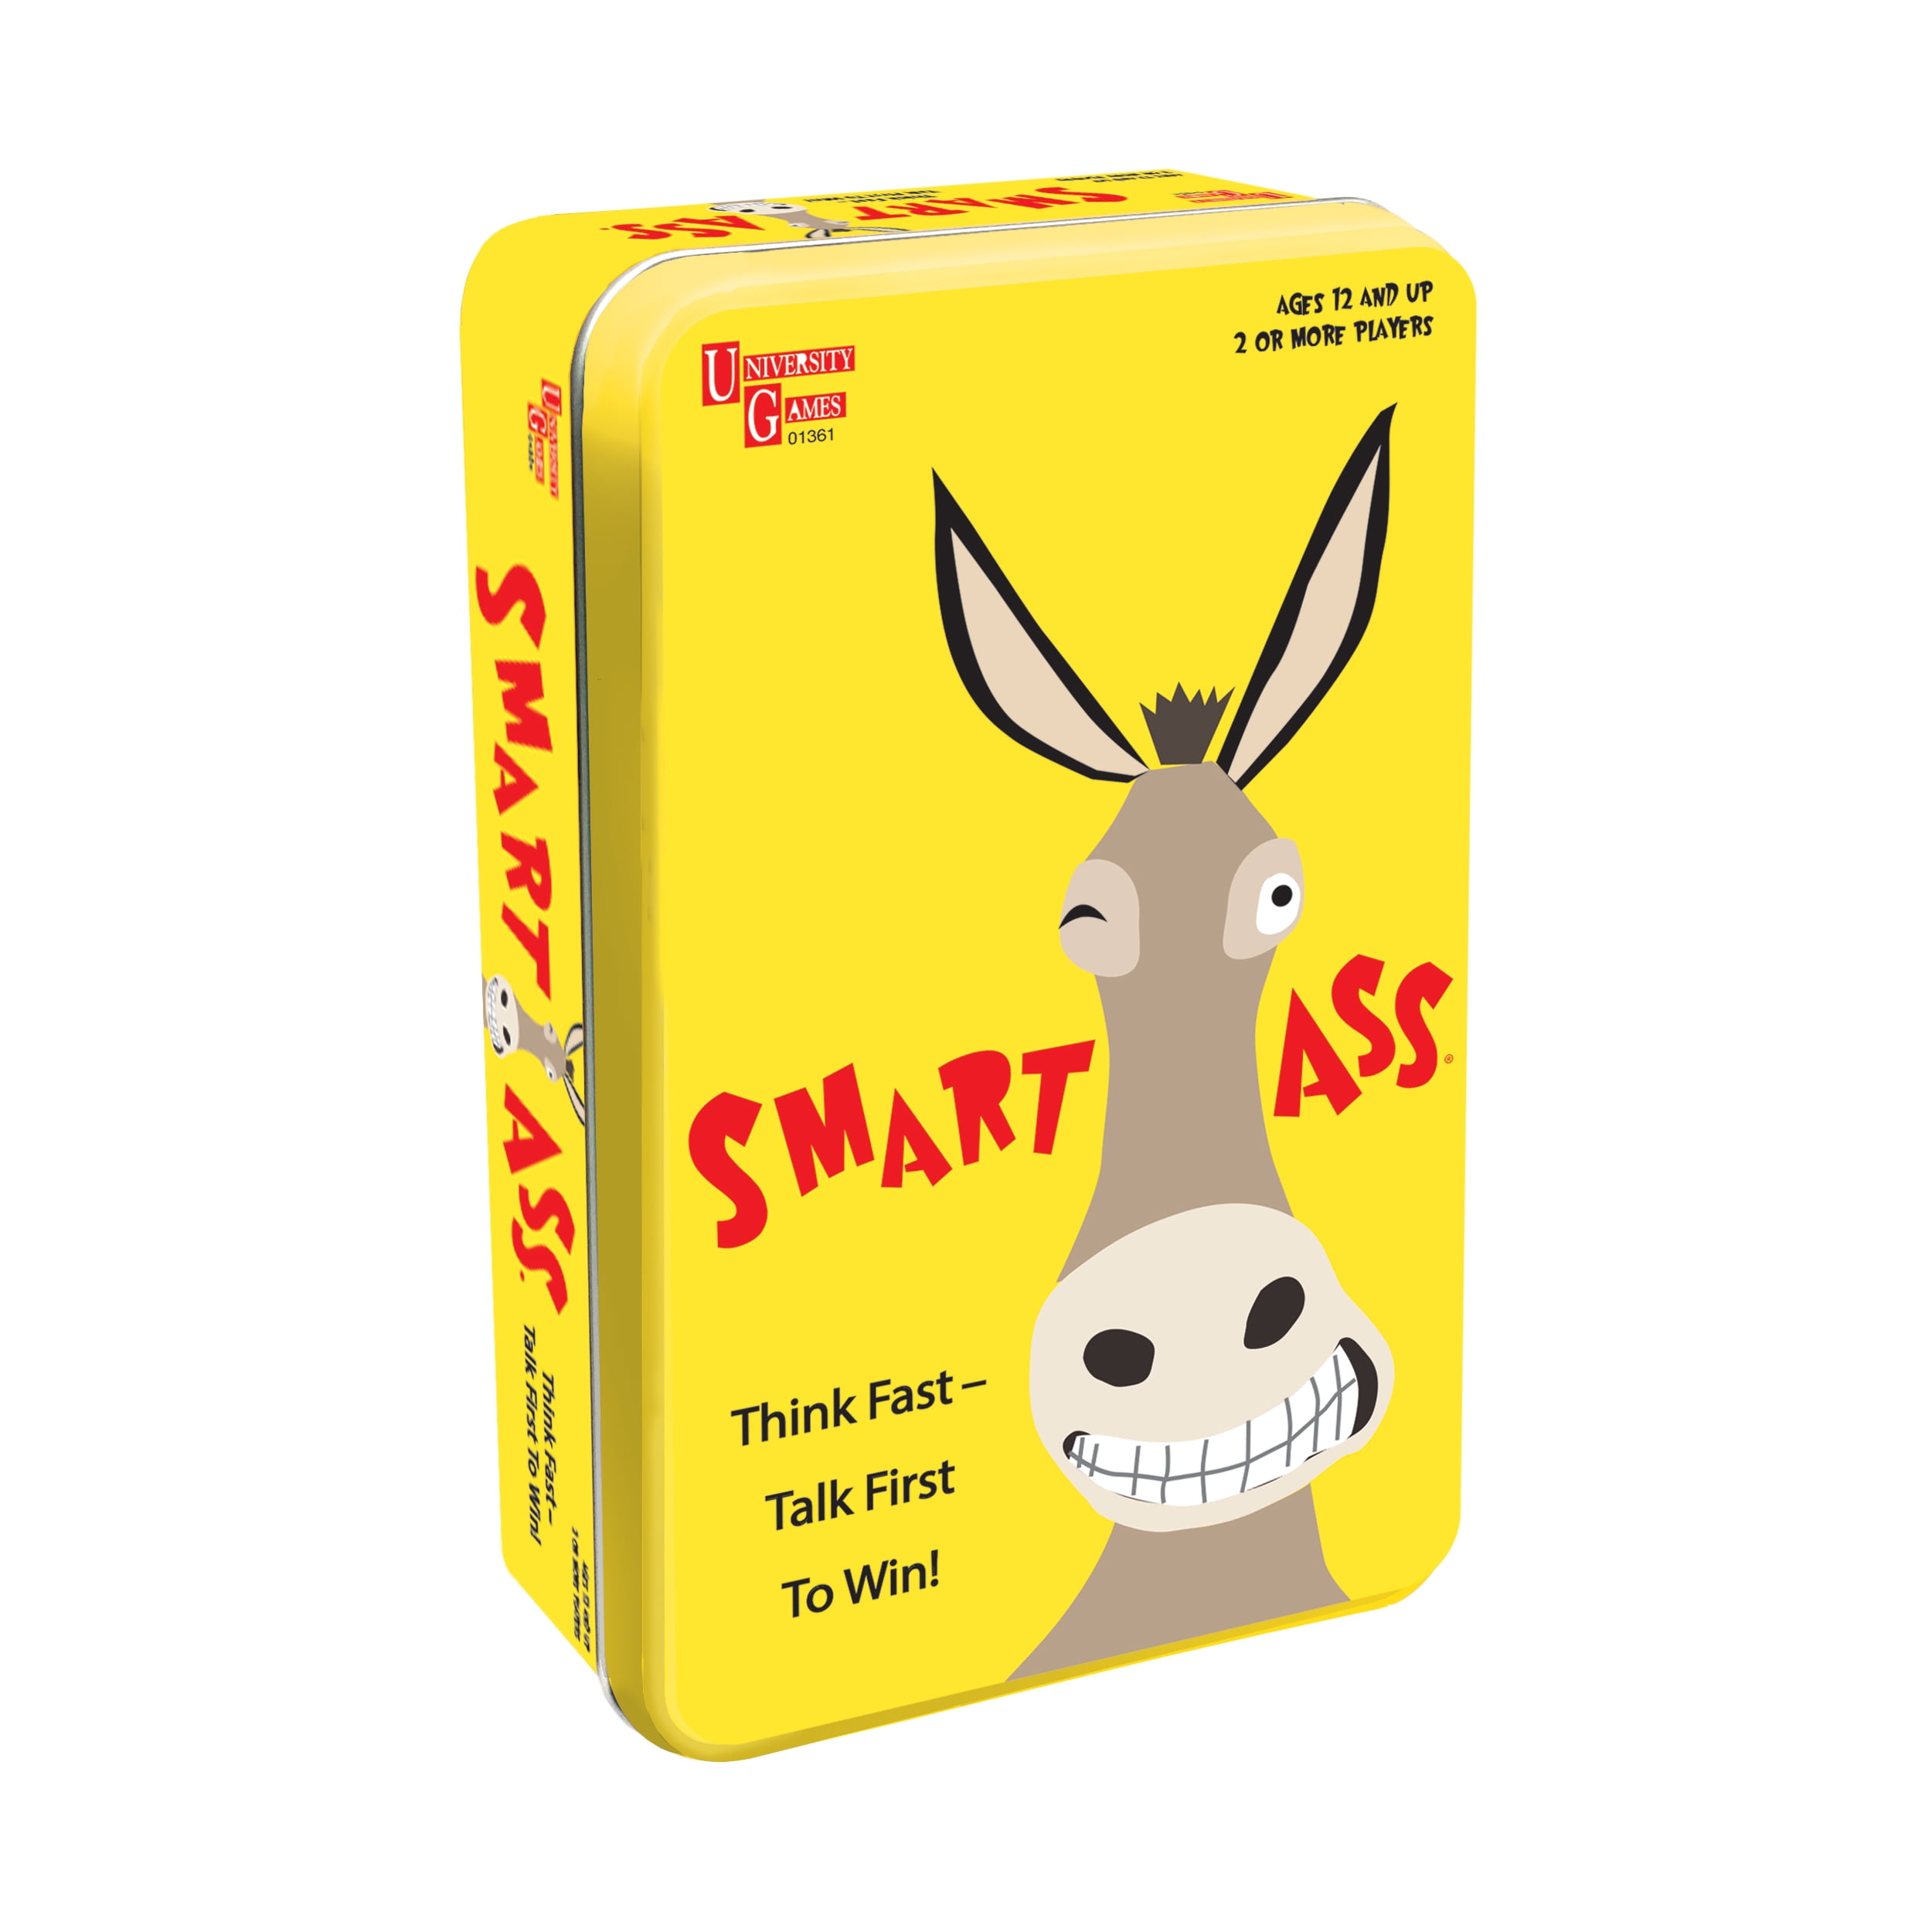 Smart Ass Card Game and Booster Set in a Tin, by University Games